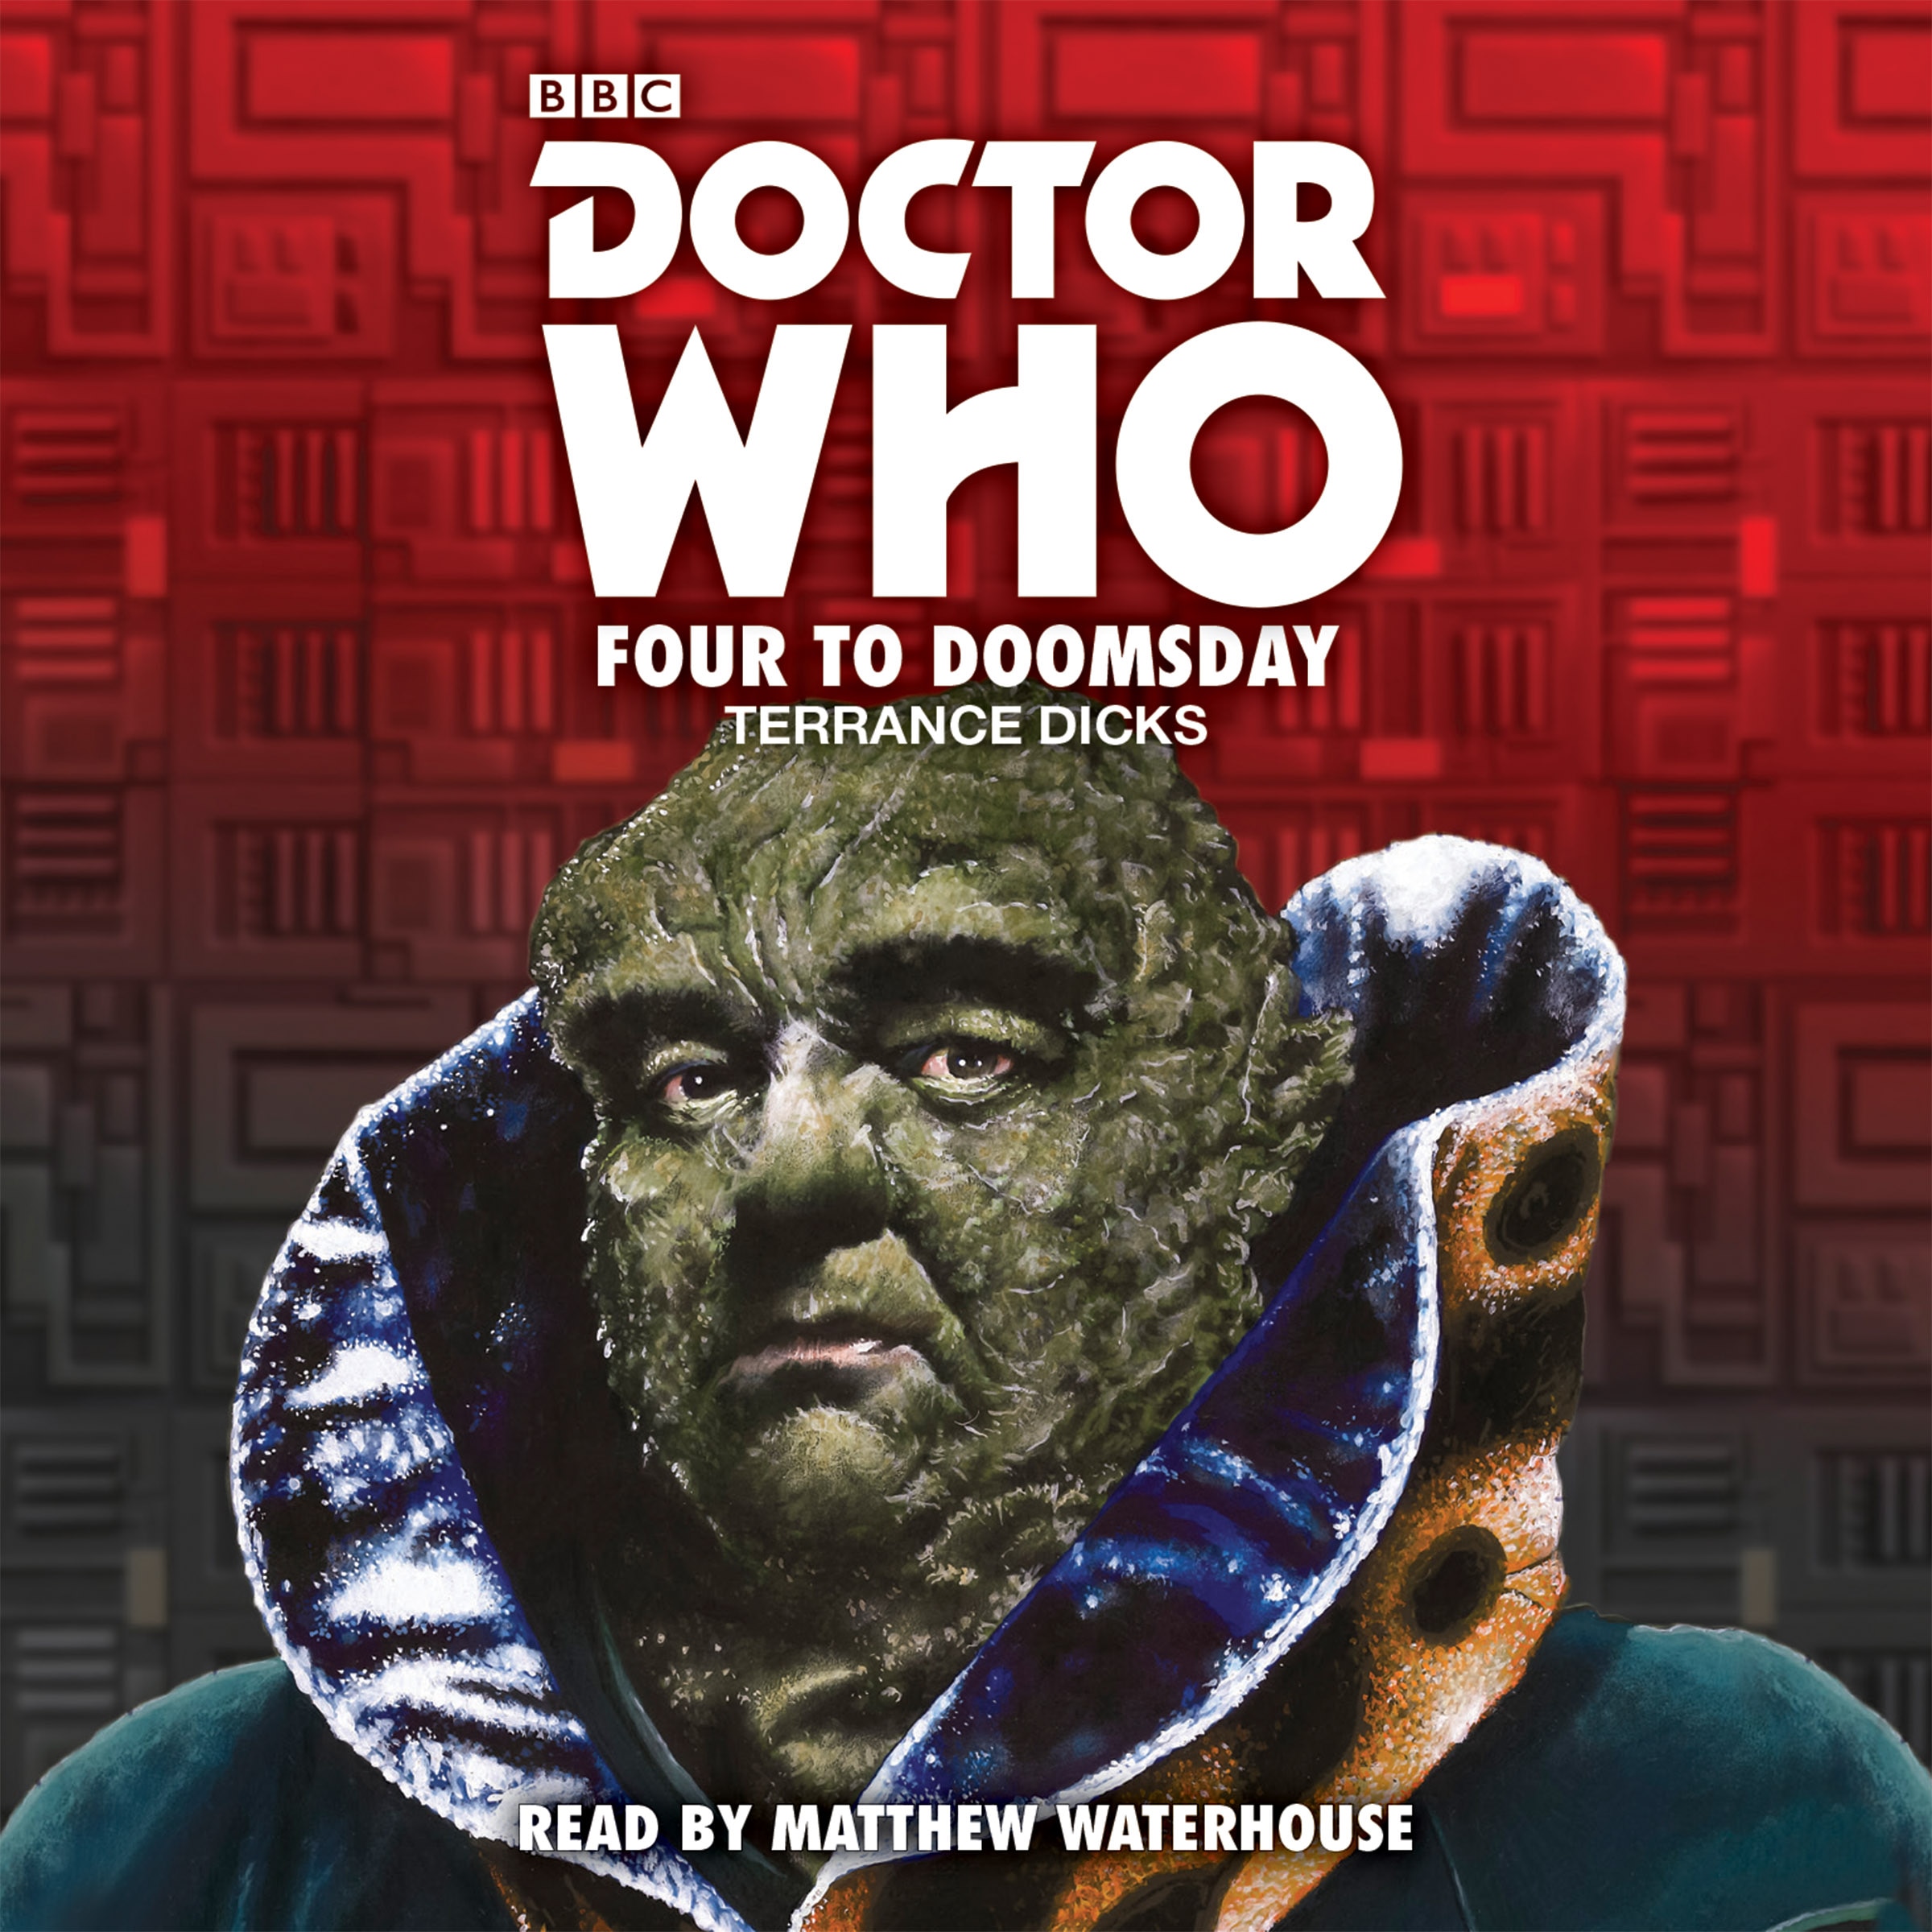 dr who audio adventure - the lost planet